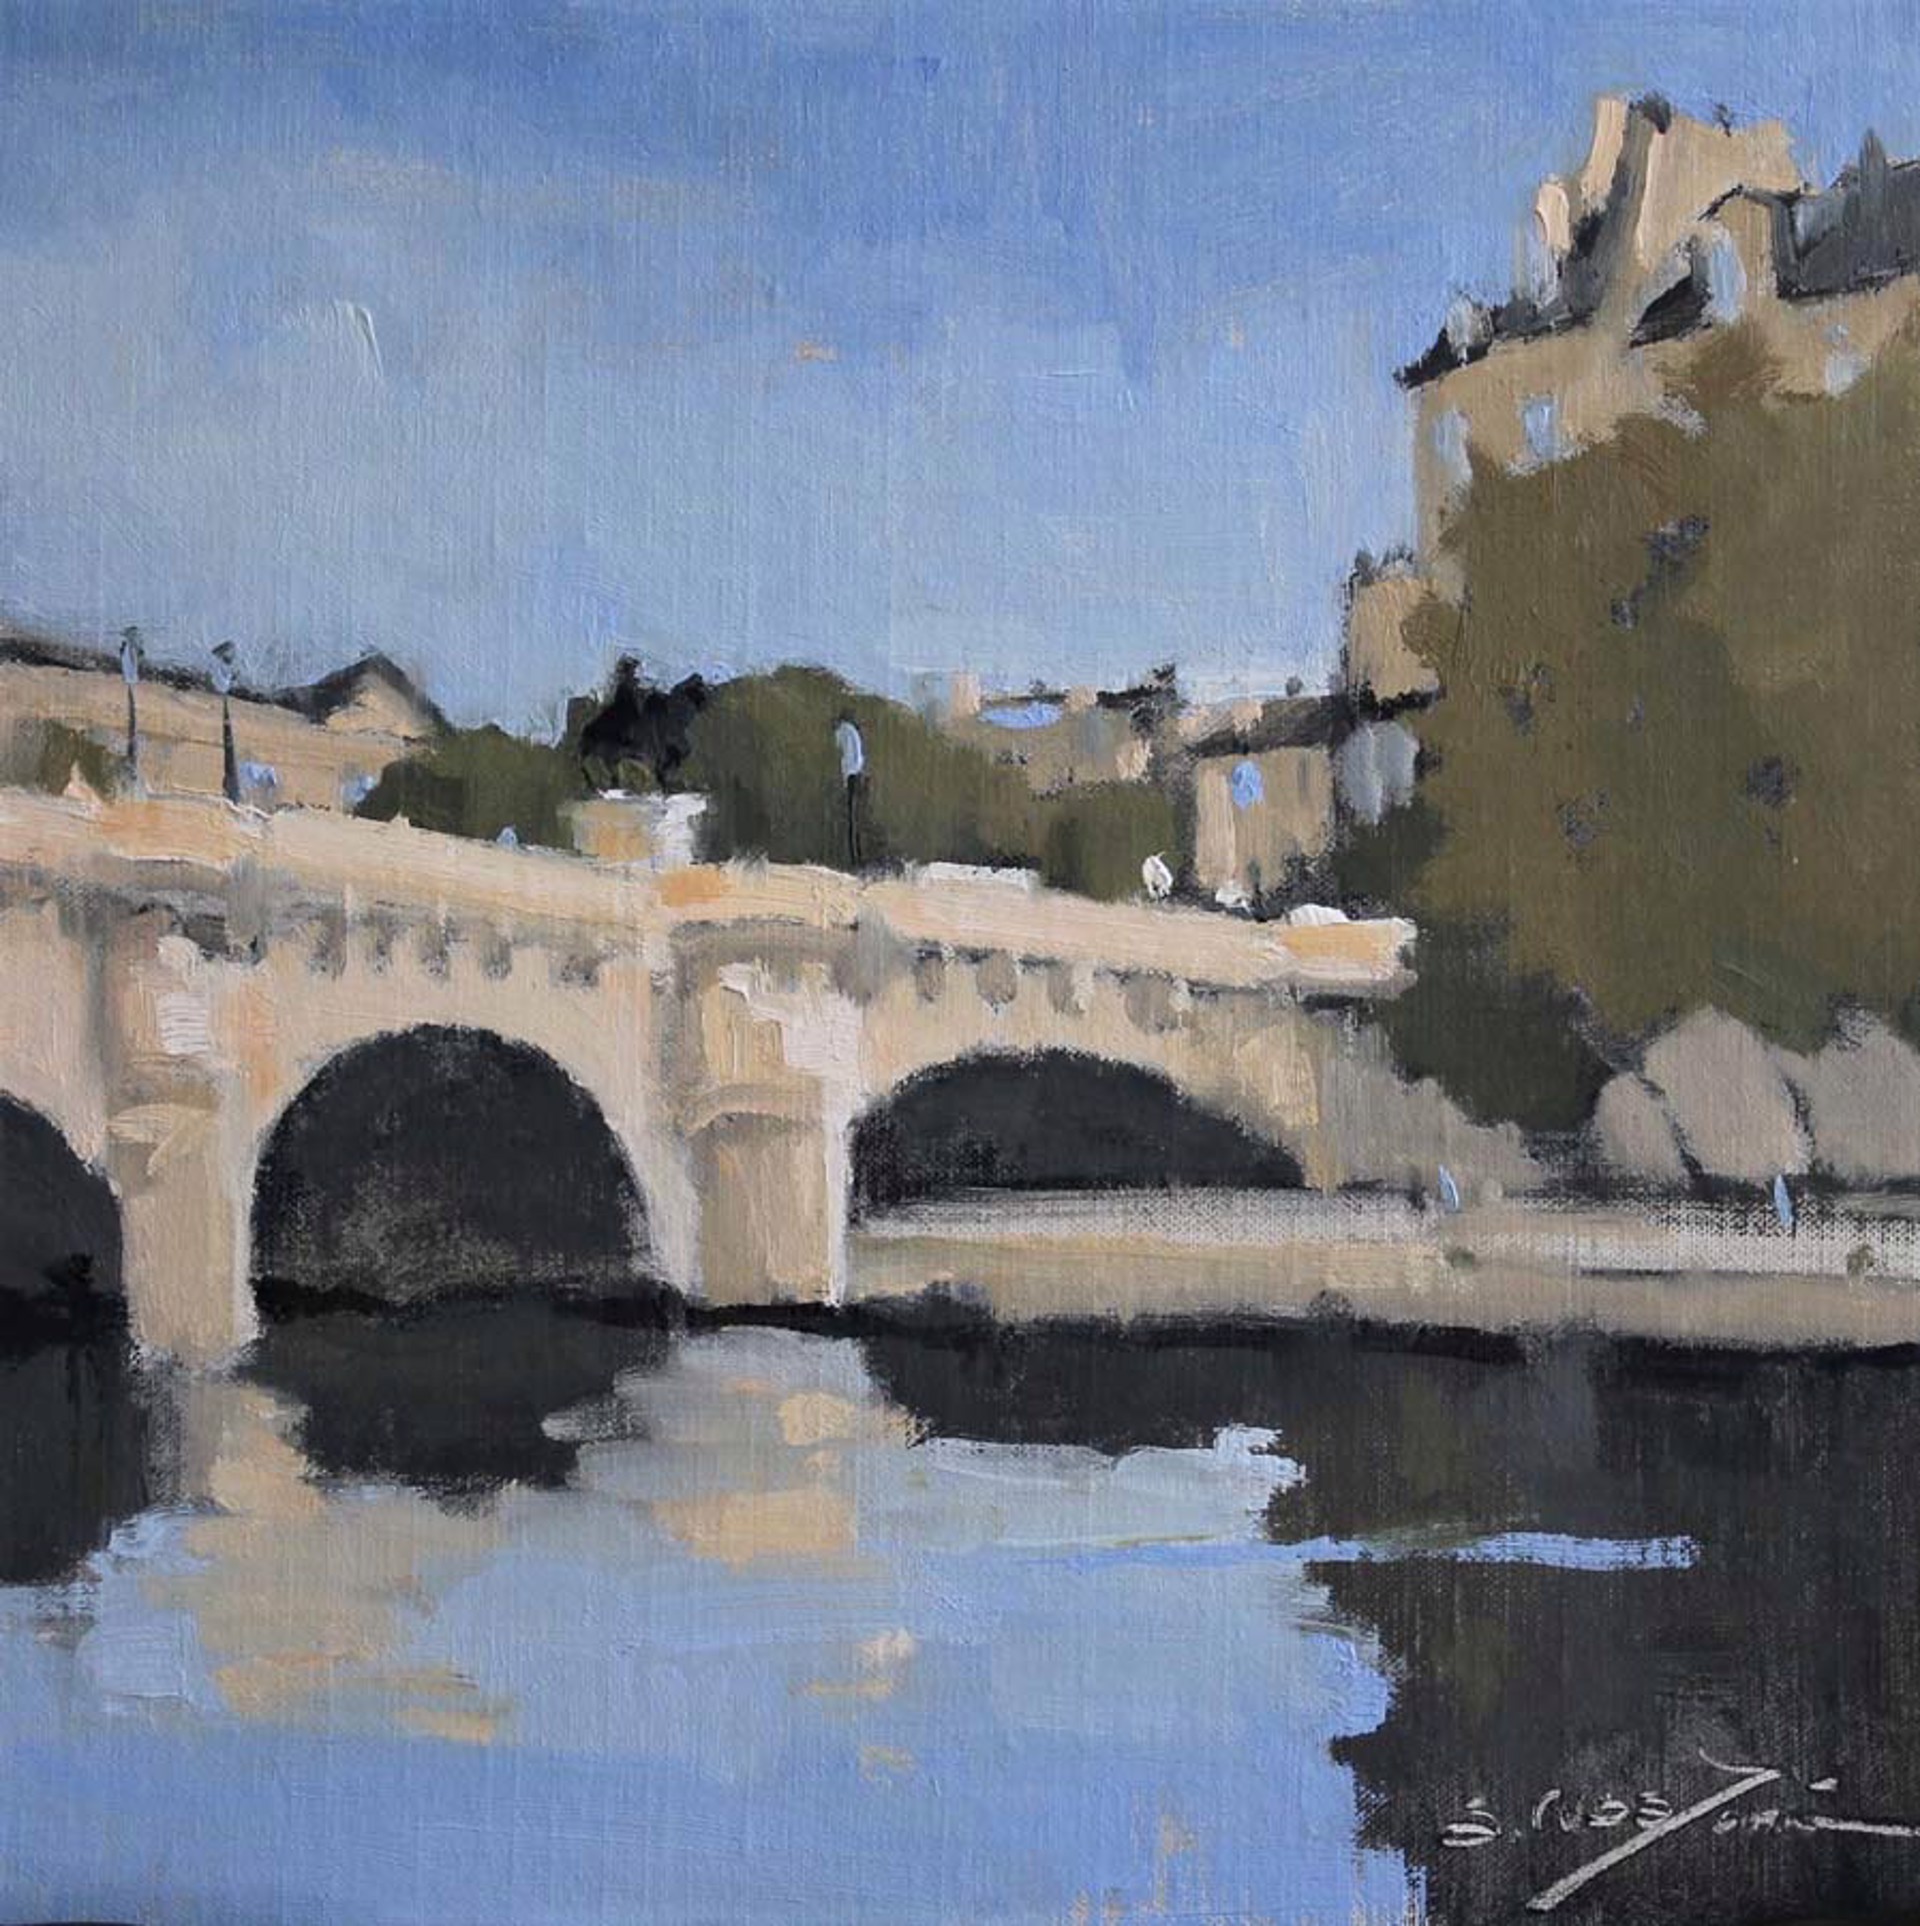 Henry IV on Pont Neuf by Sherrie Russ Levine